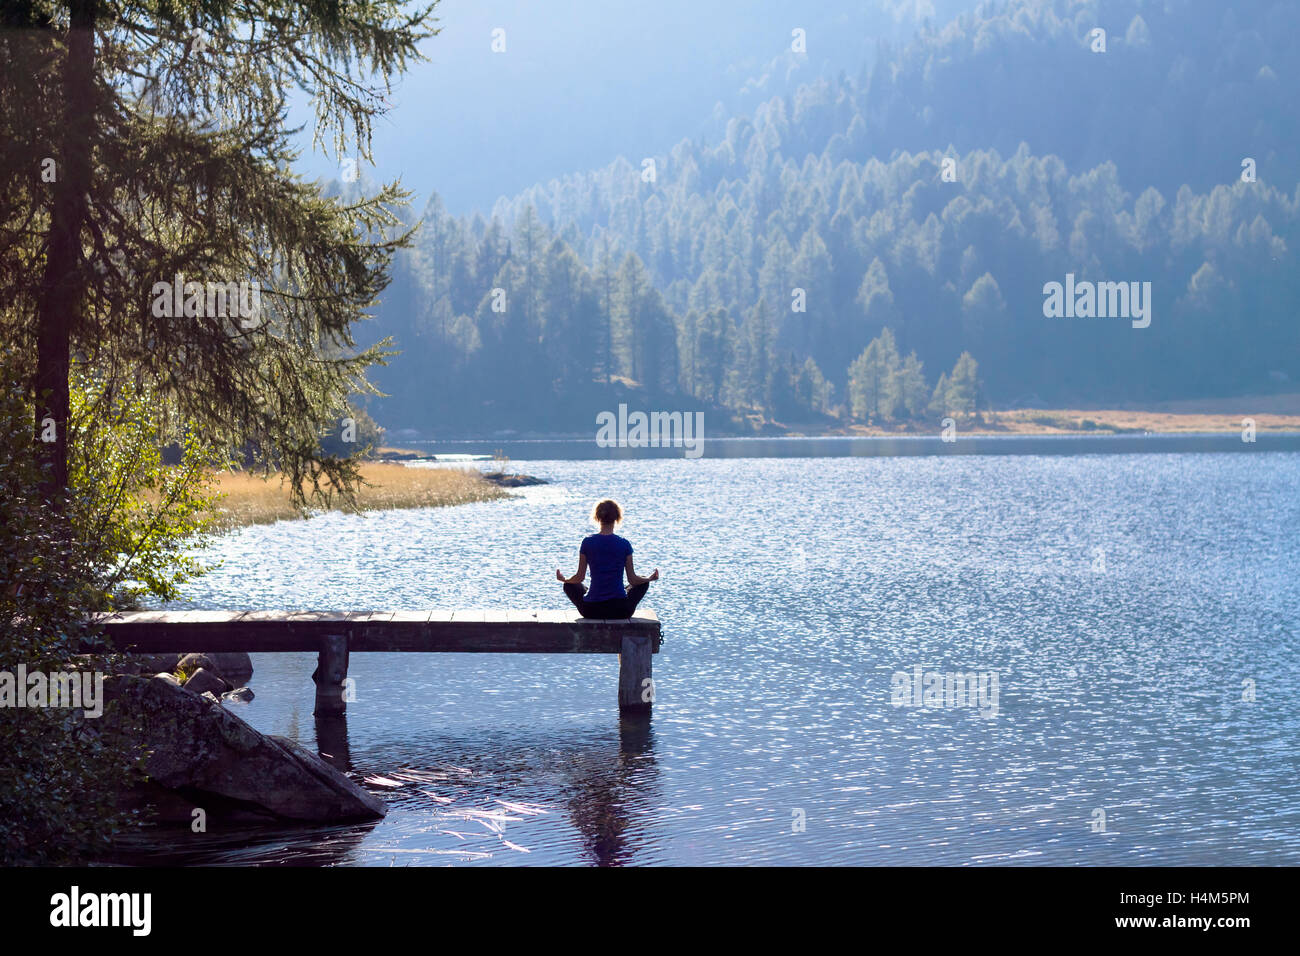 Pretty woman practicing yoga at a lake Banque D'Images